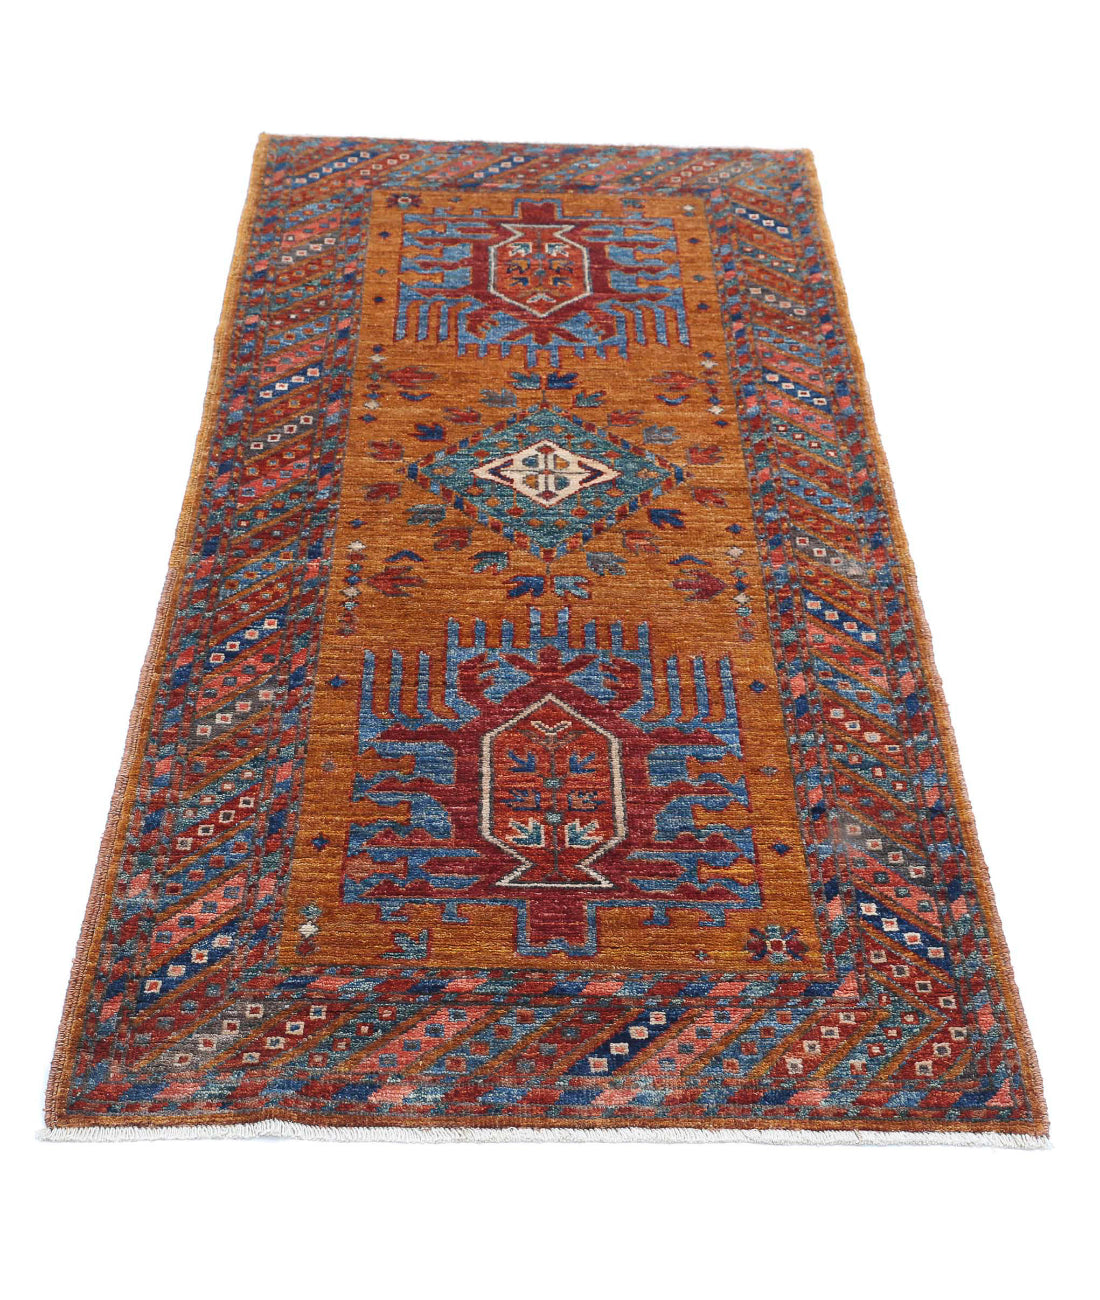 Hand Knotted Nomadic Caucasian Humna Wool Rug - 2'7'' x 5'10'' 2'7'' x 5'10'' (78 X 175) / Gold / Multi